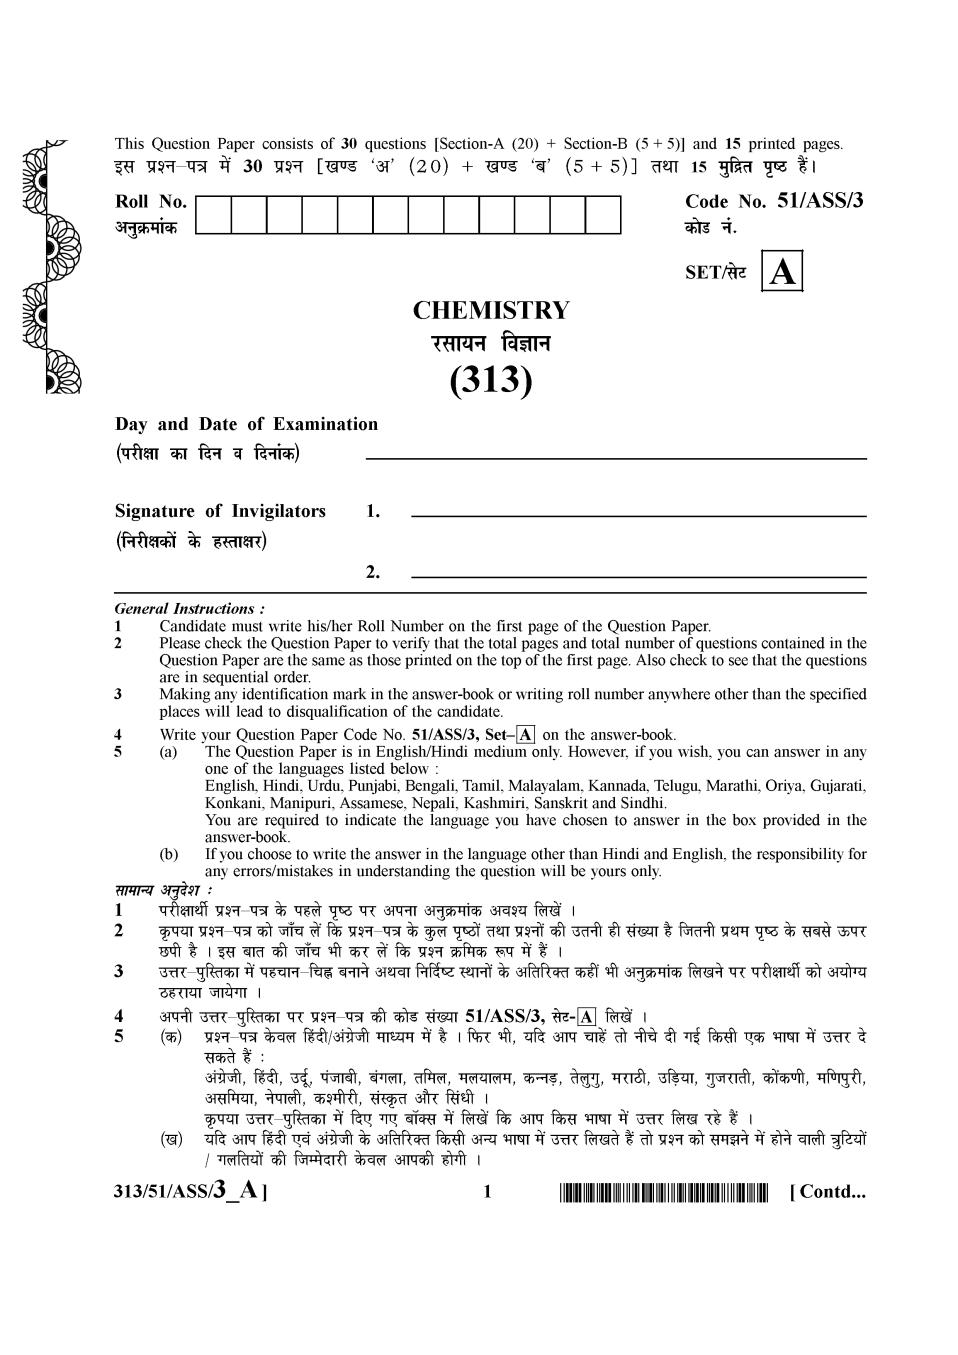 NIOS Class 12 Question Paper Oct 2015 - Chemistry - Page 1